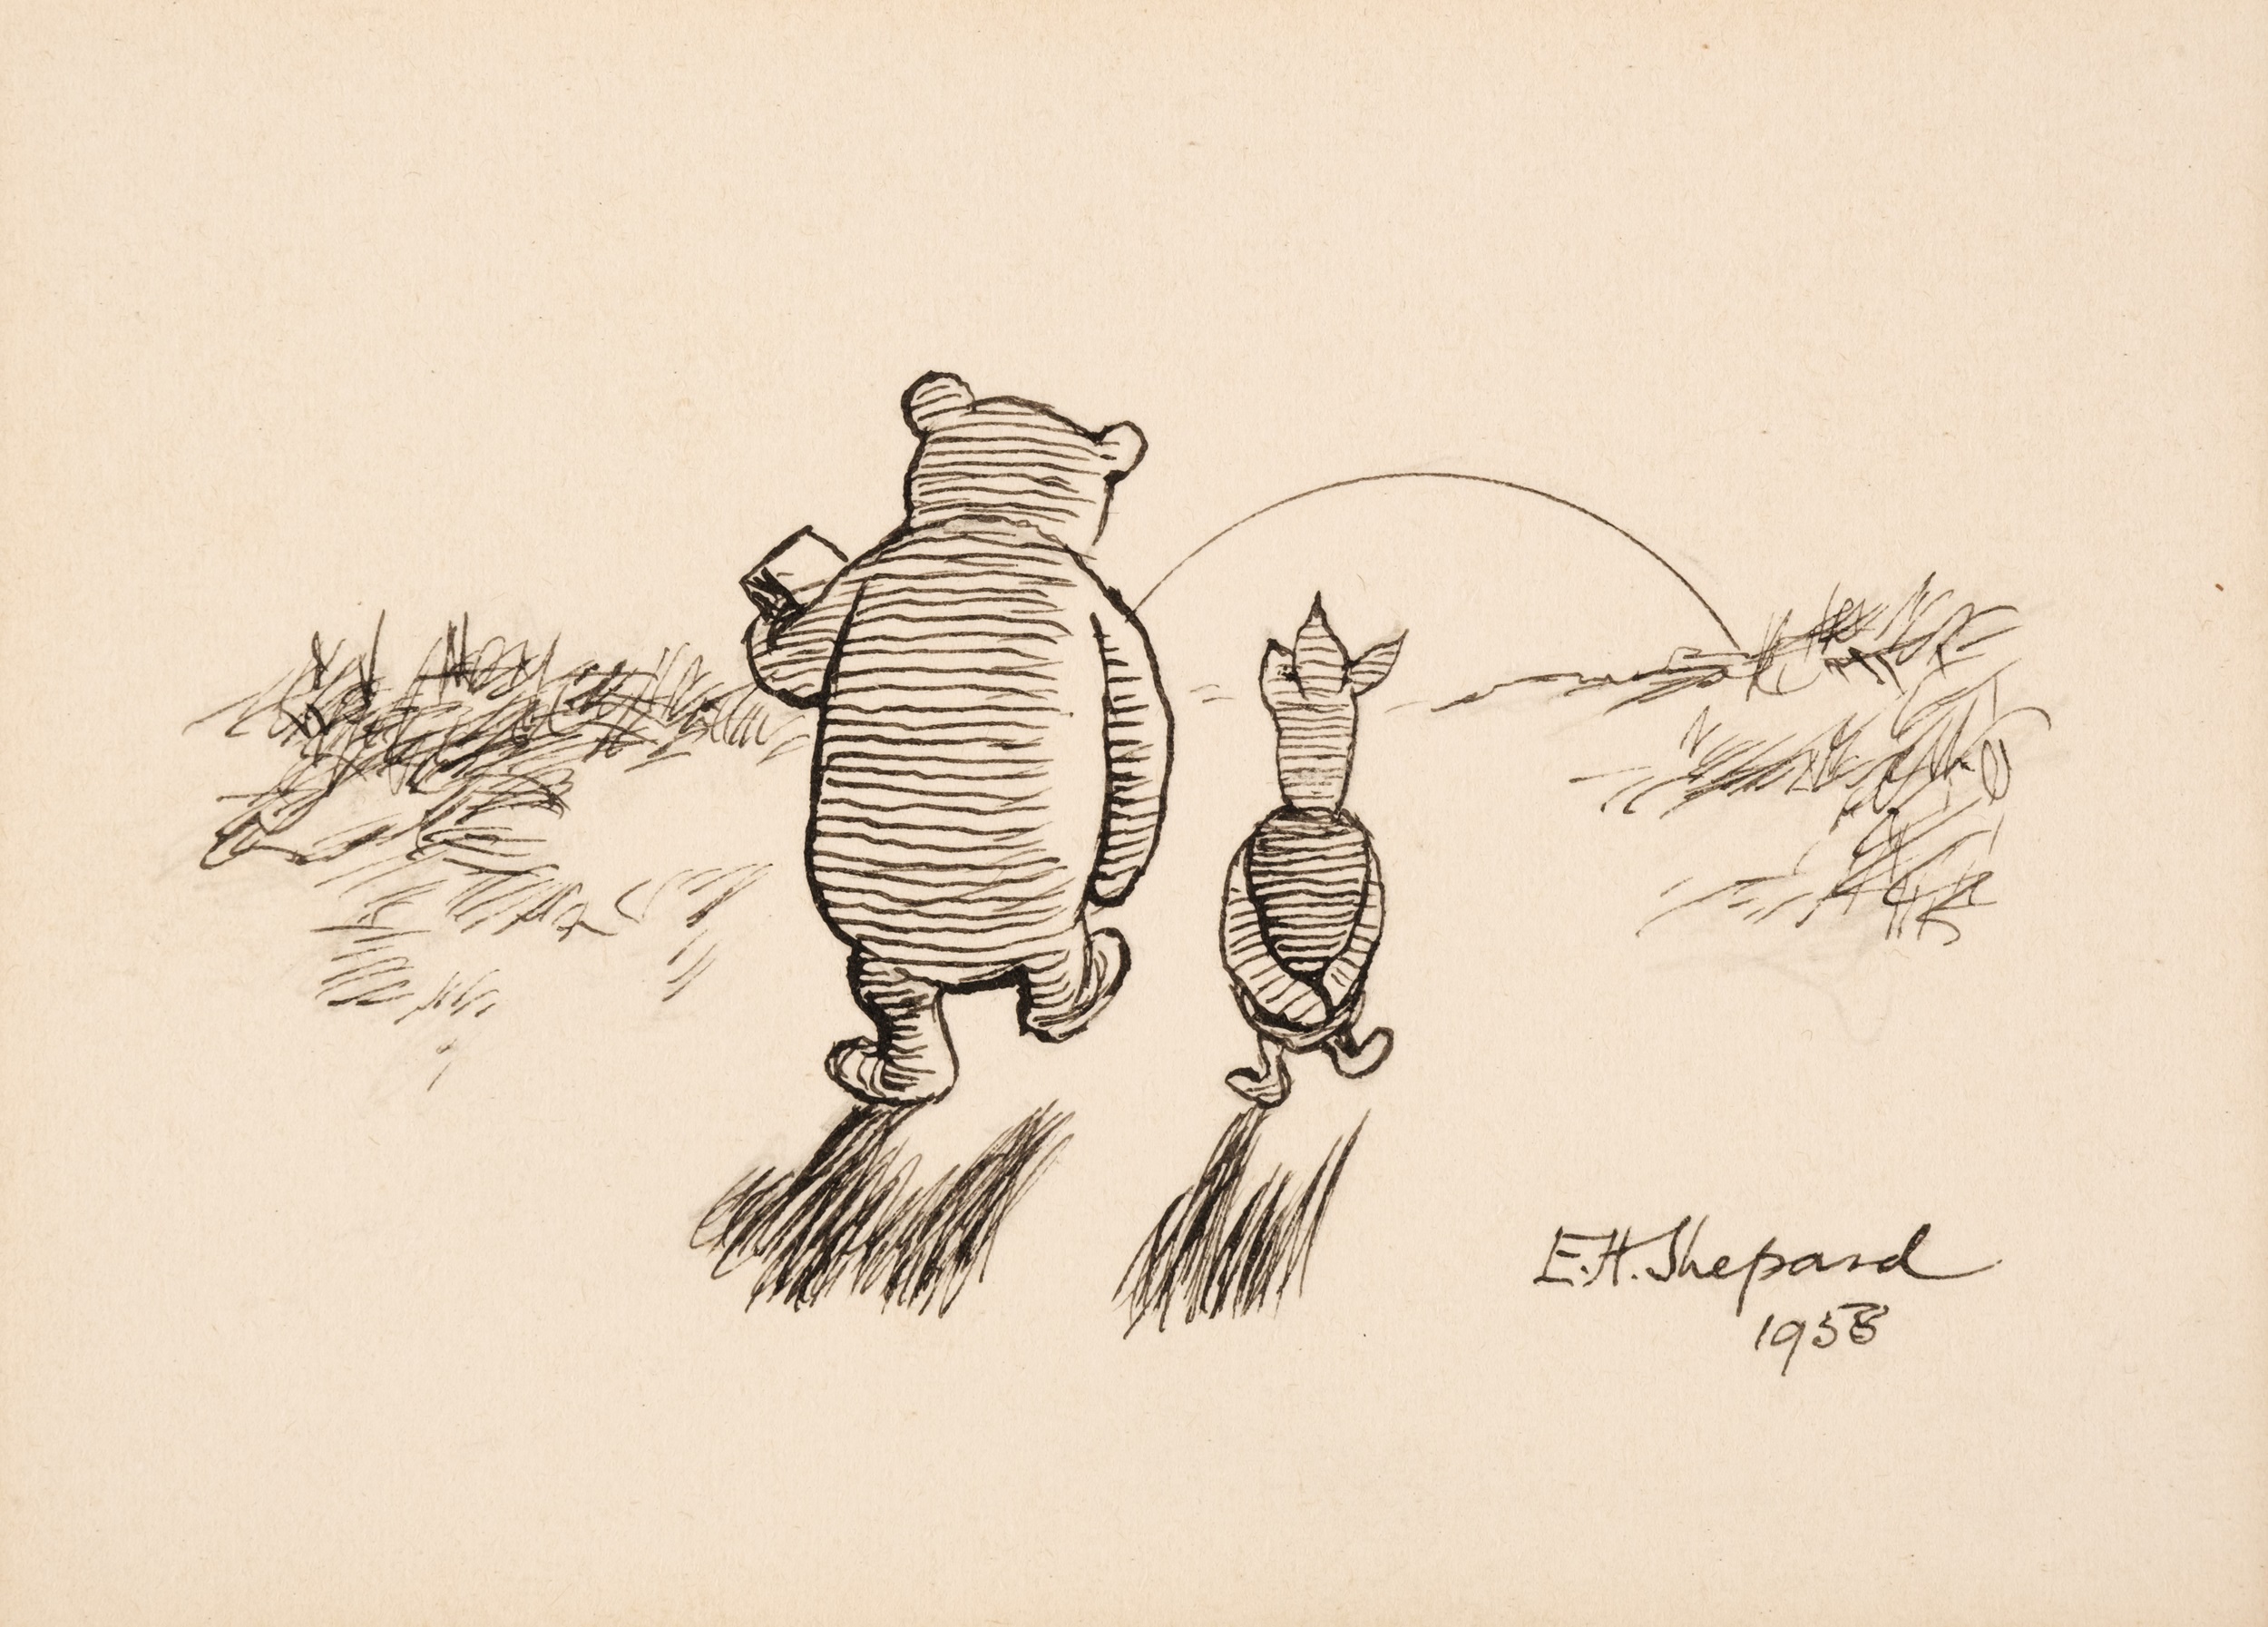 Pooh and Piglet Original Drawing Discovered in Cellar Drawer